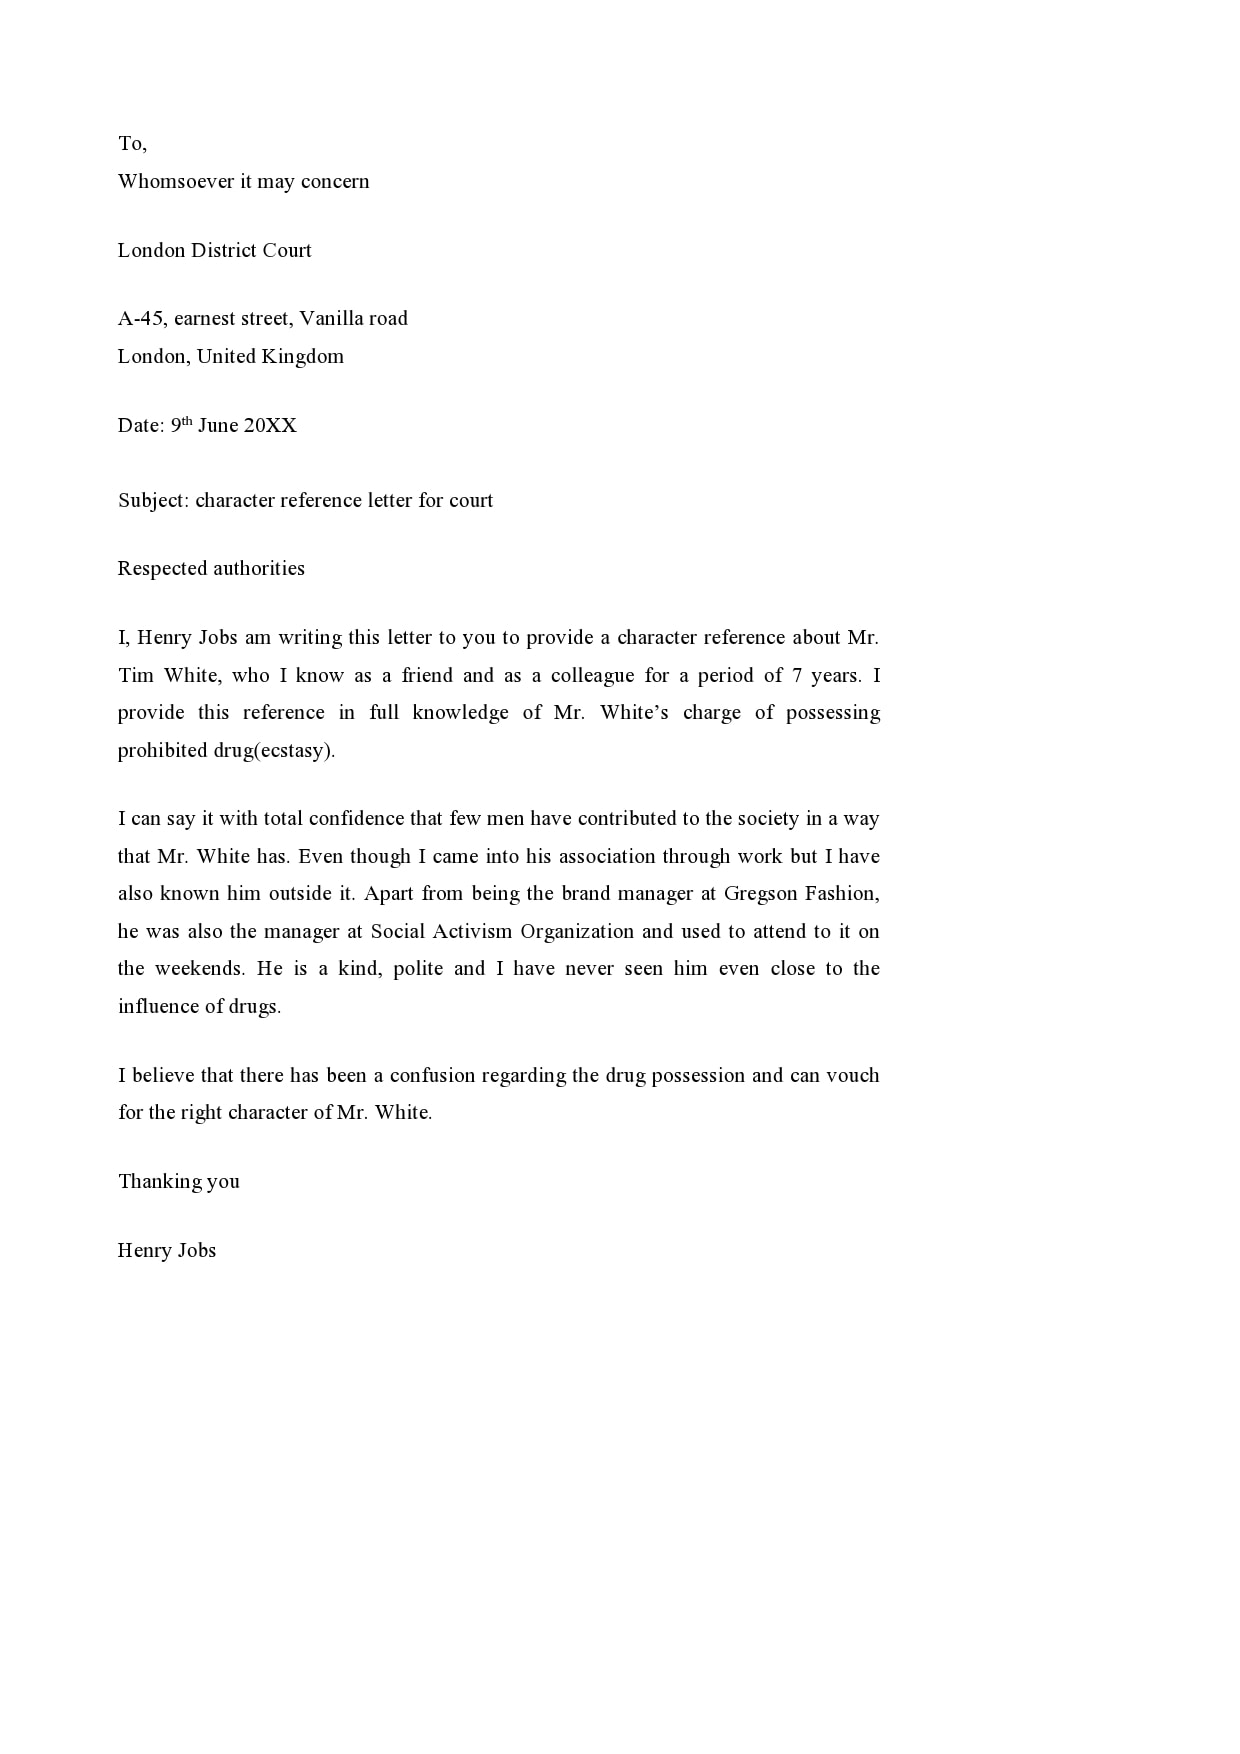 Friend Recommendation Letter Sample from templatearchive.com